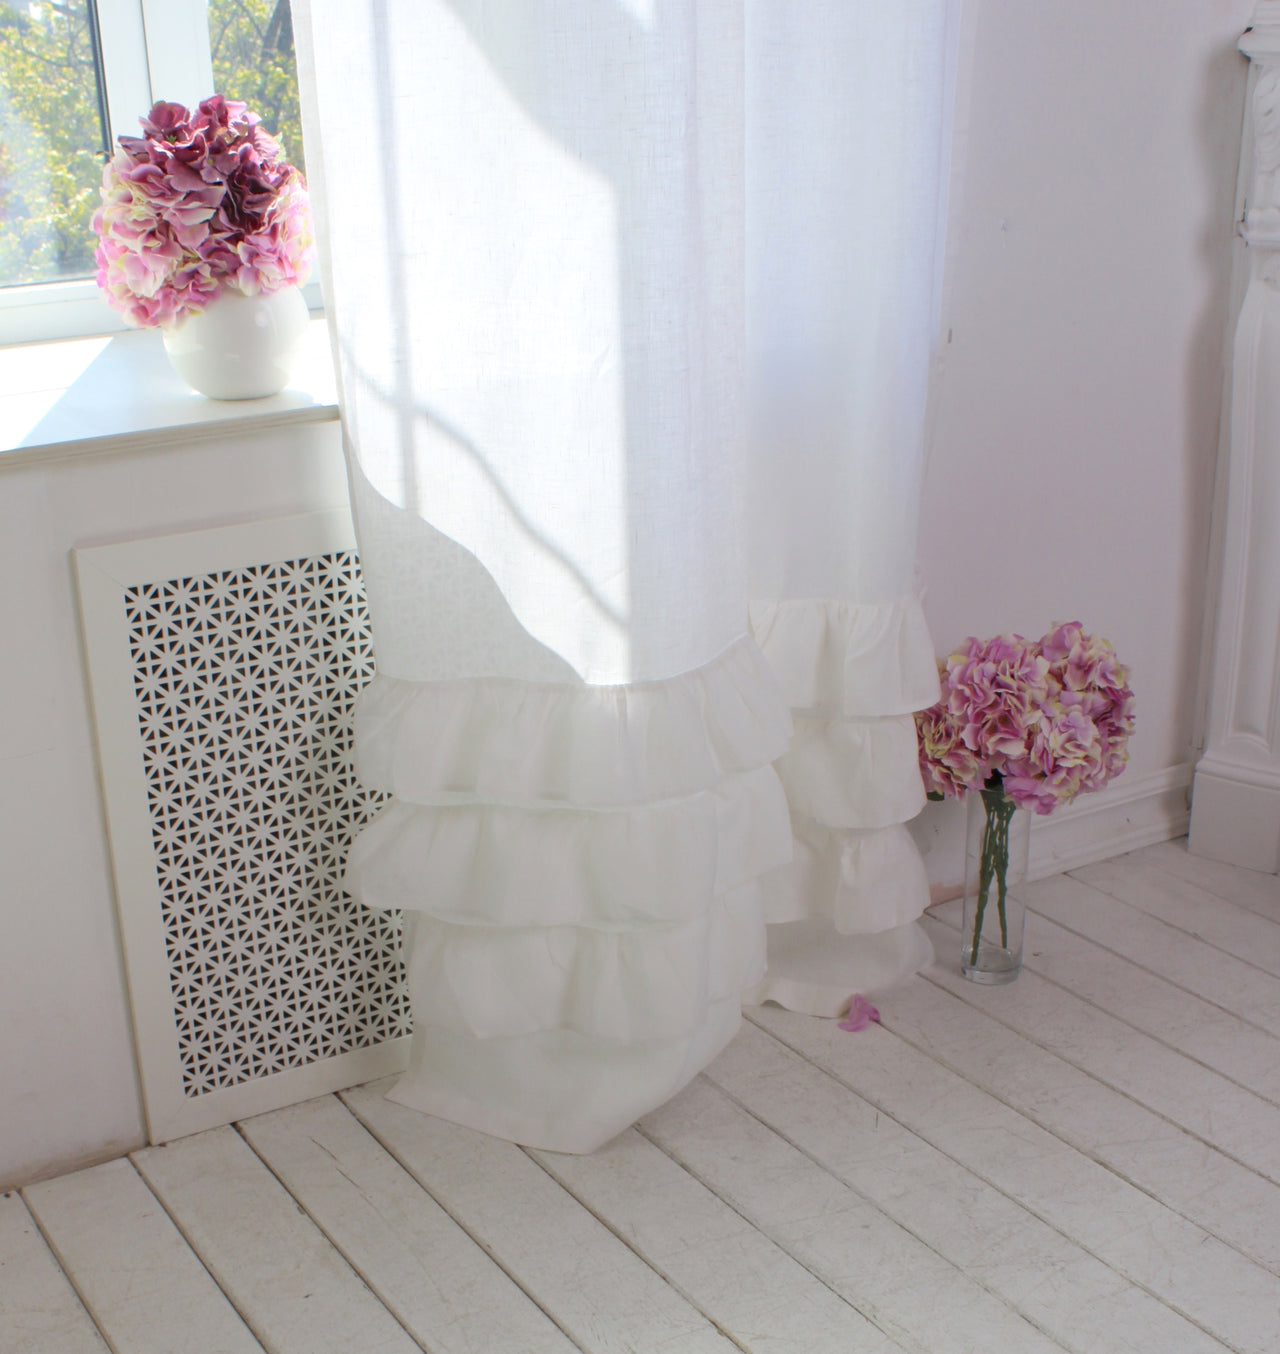 Curtain with Ruffles in White